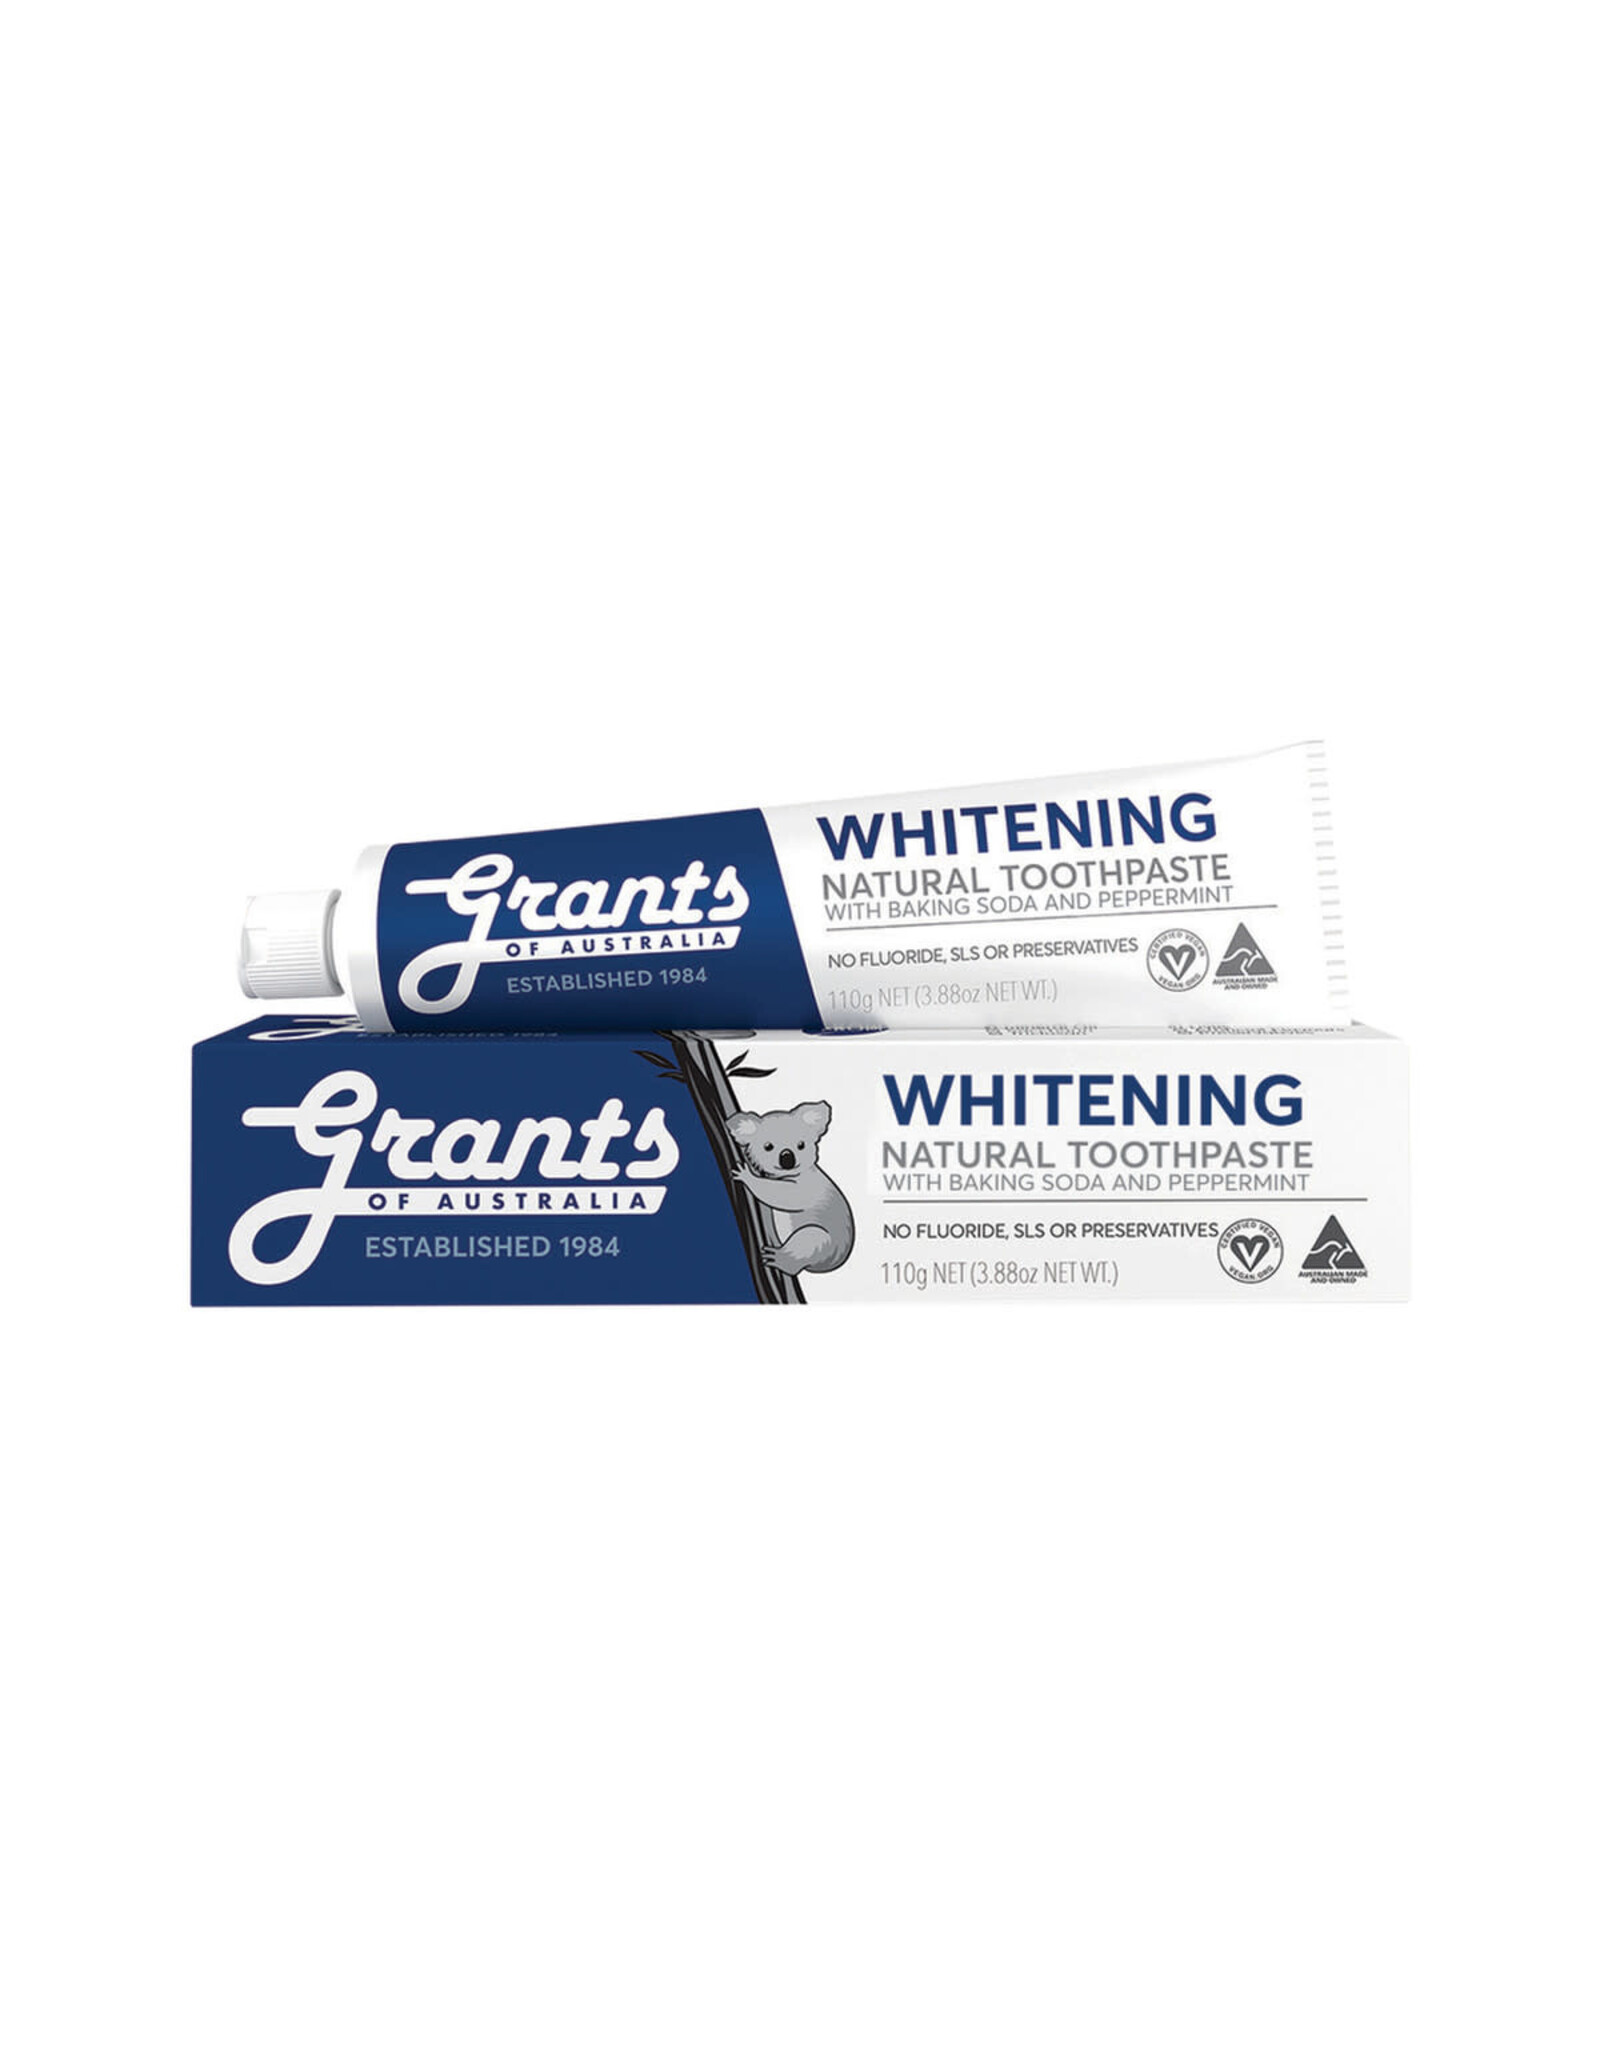 Grant's Natural Toothpaste Whitening with Baking Soda & Peppermint 110g